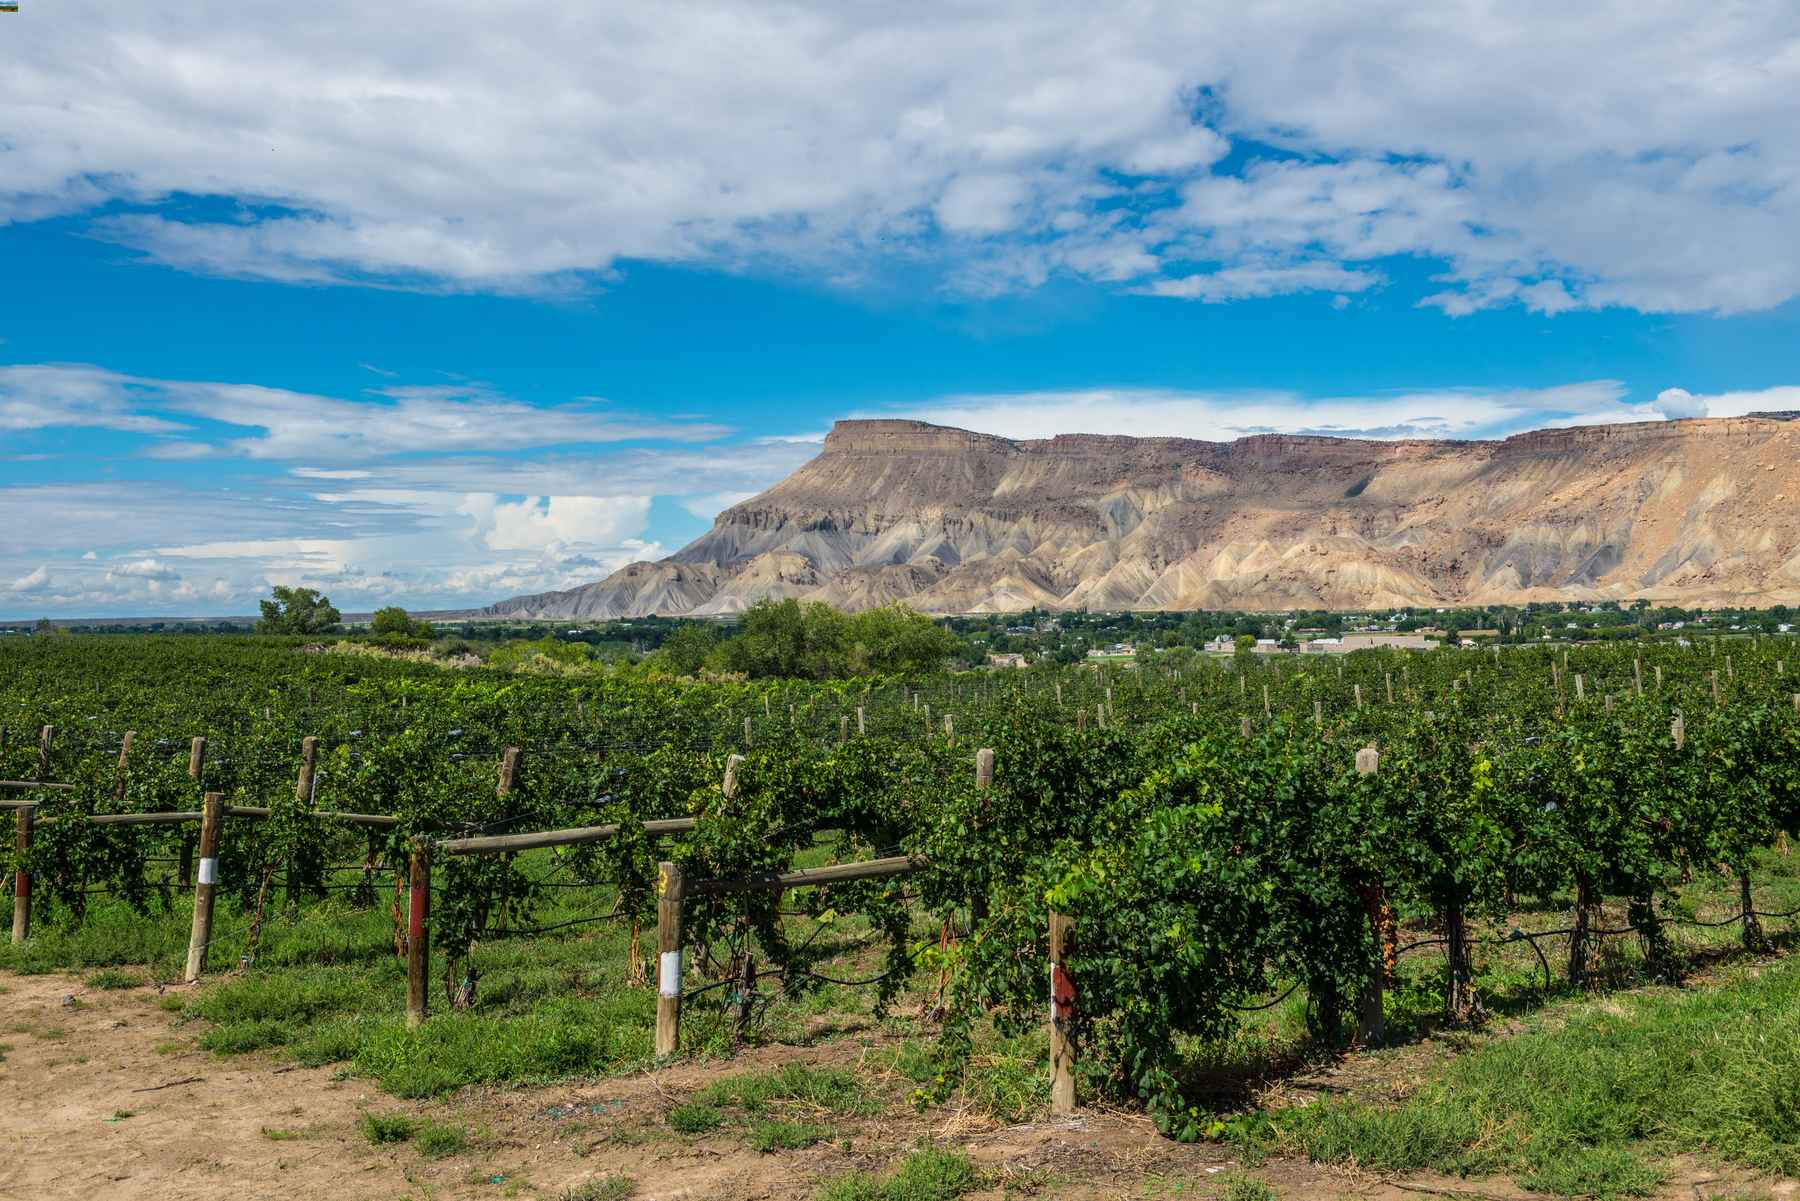 Rows of grape vines against blue skies and tabletop mesa in Palisade, Colorado, home of the Ordinary Fellow winery.